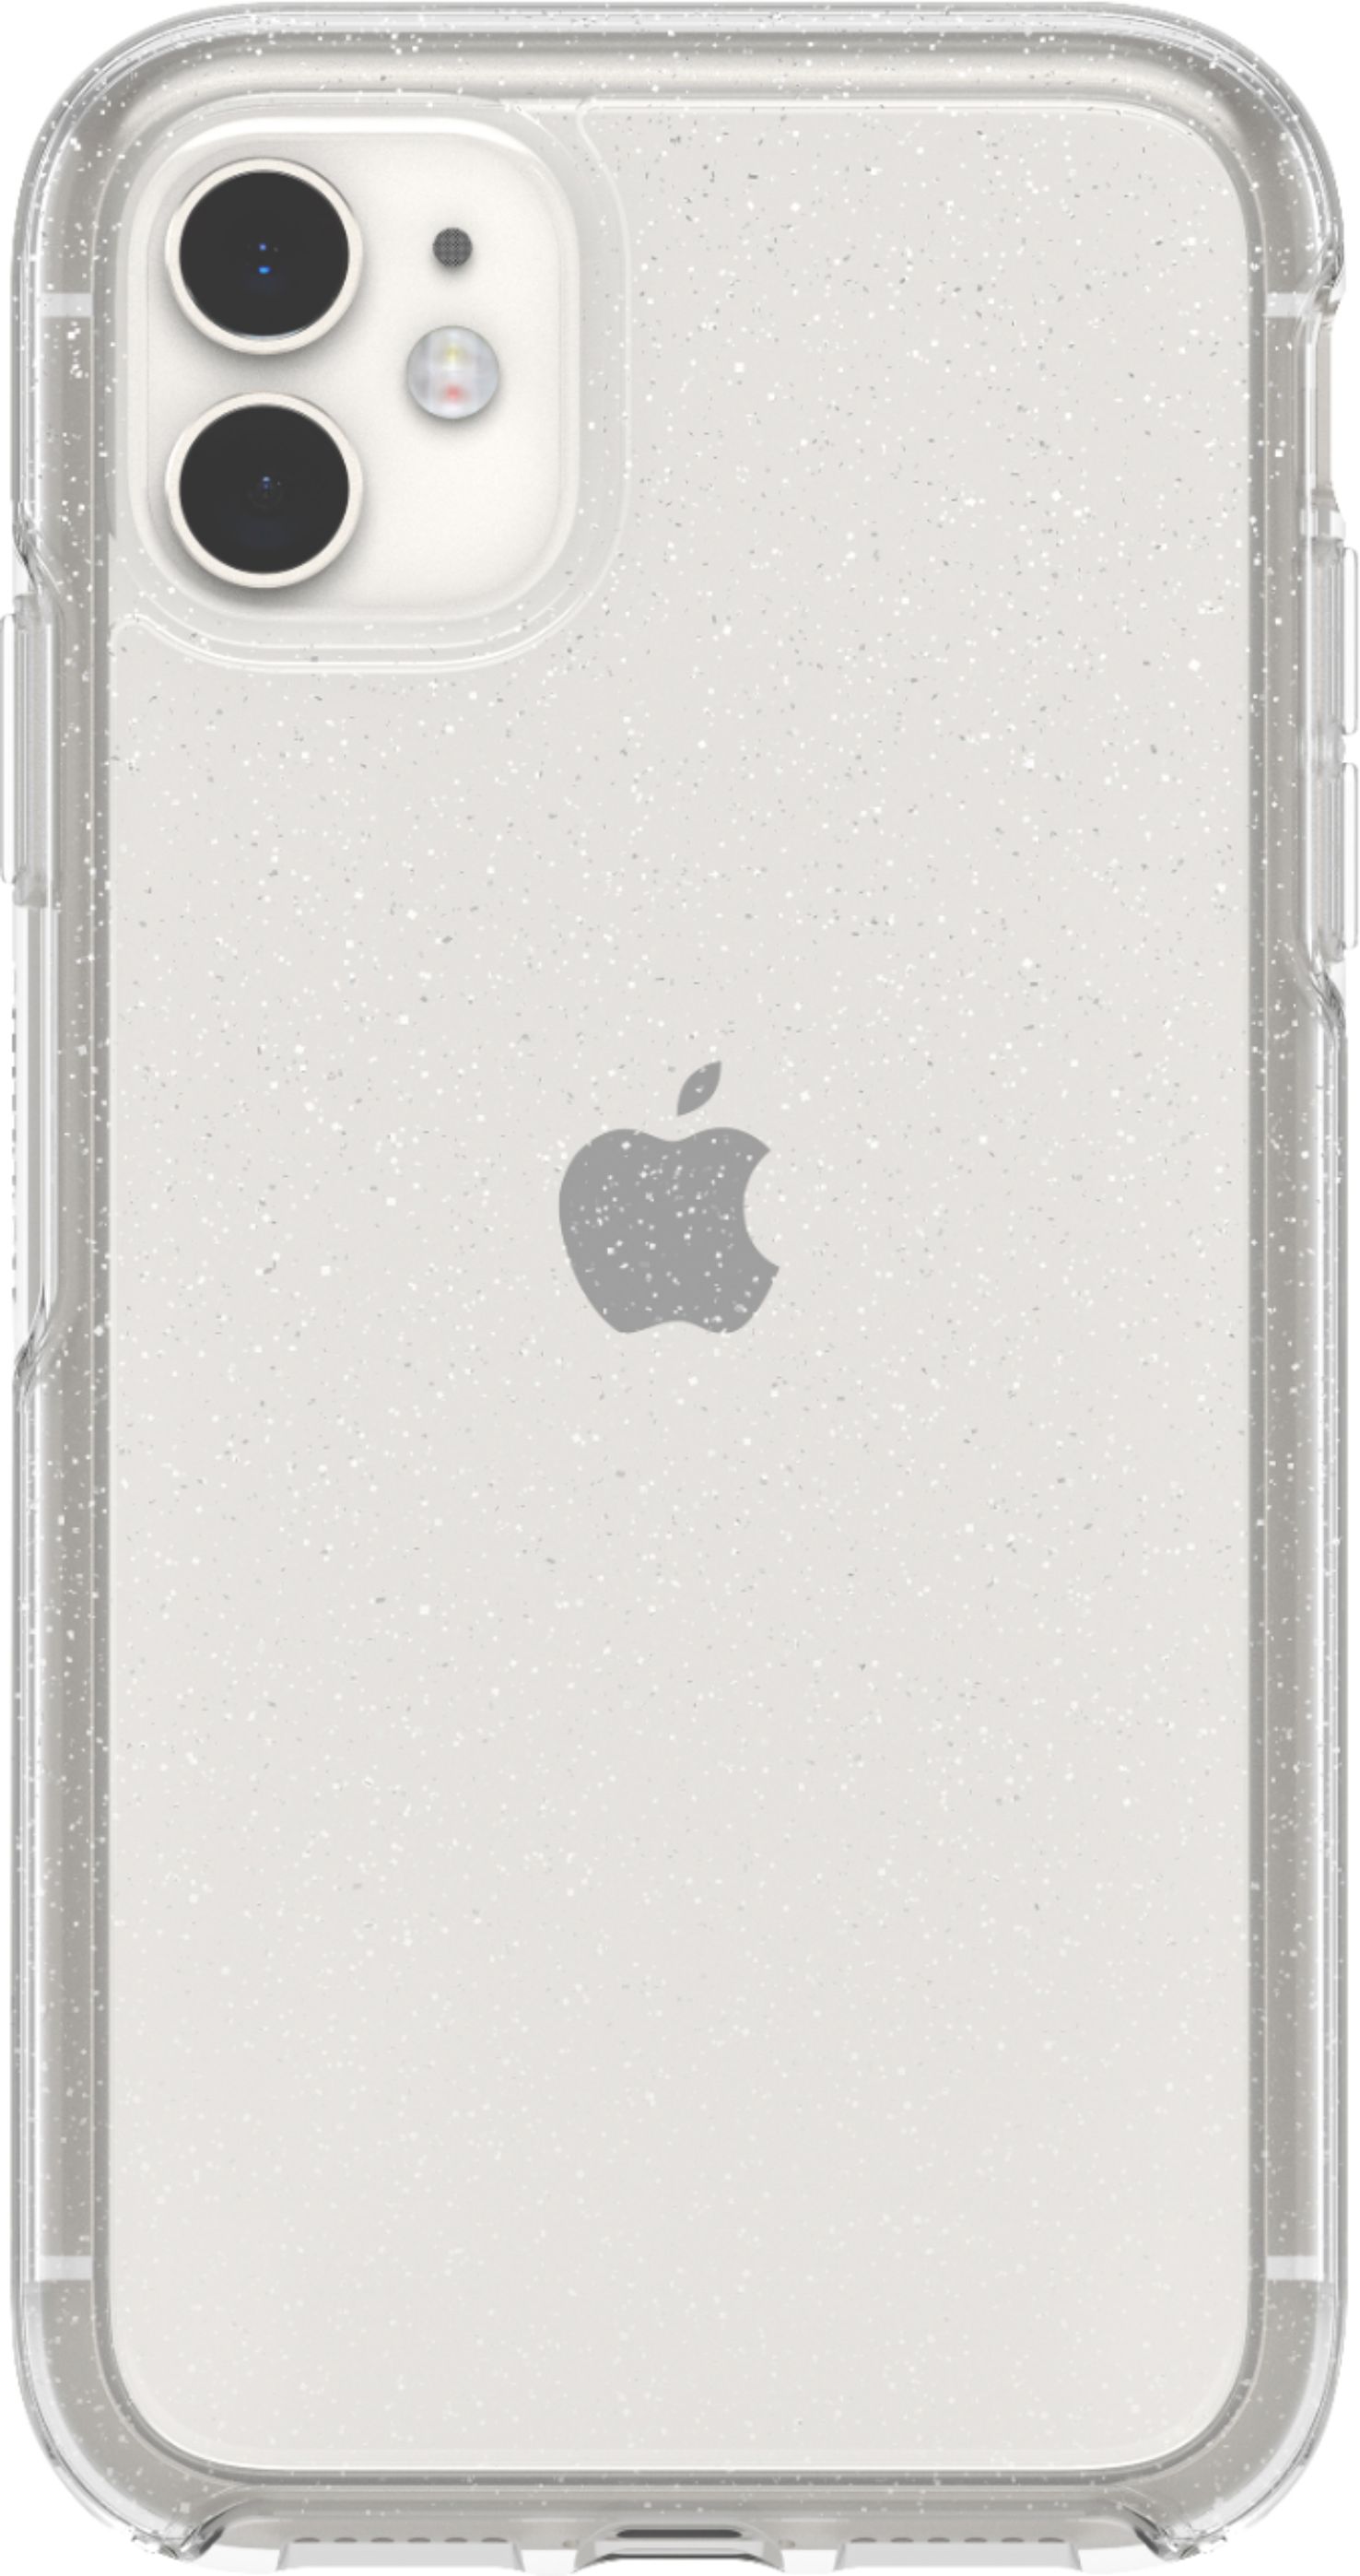 iphone case with